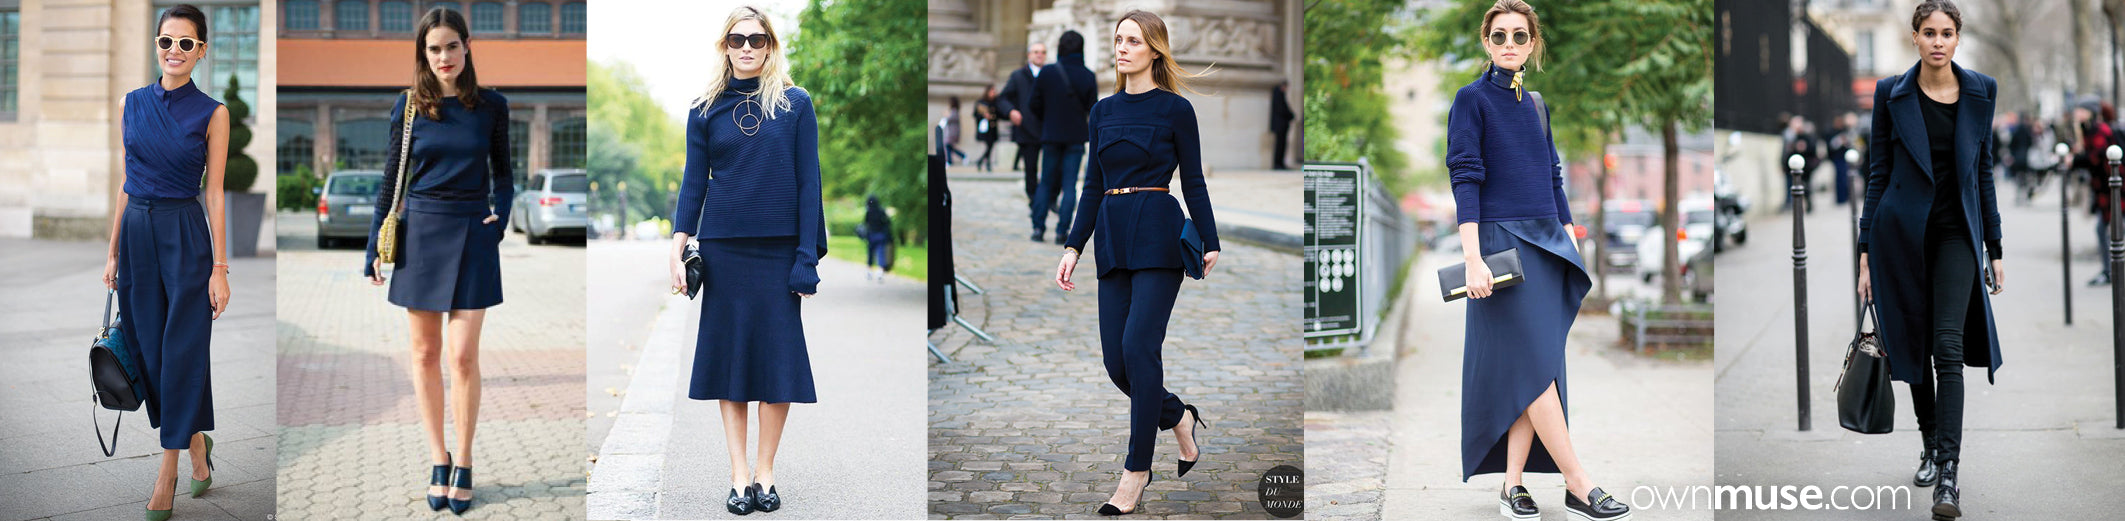 Street style fashion and style in base colour navy featured on ownmuse.com